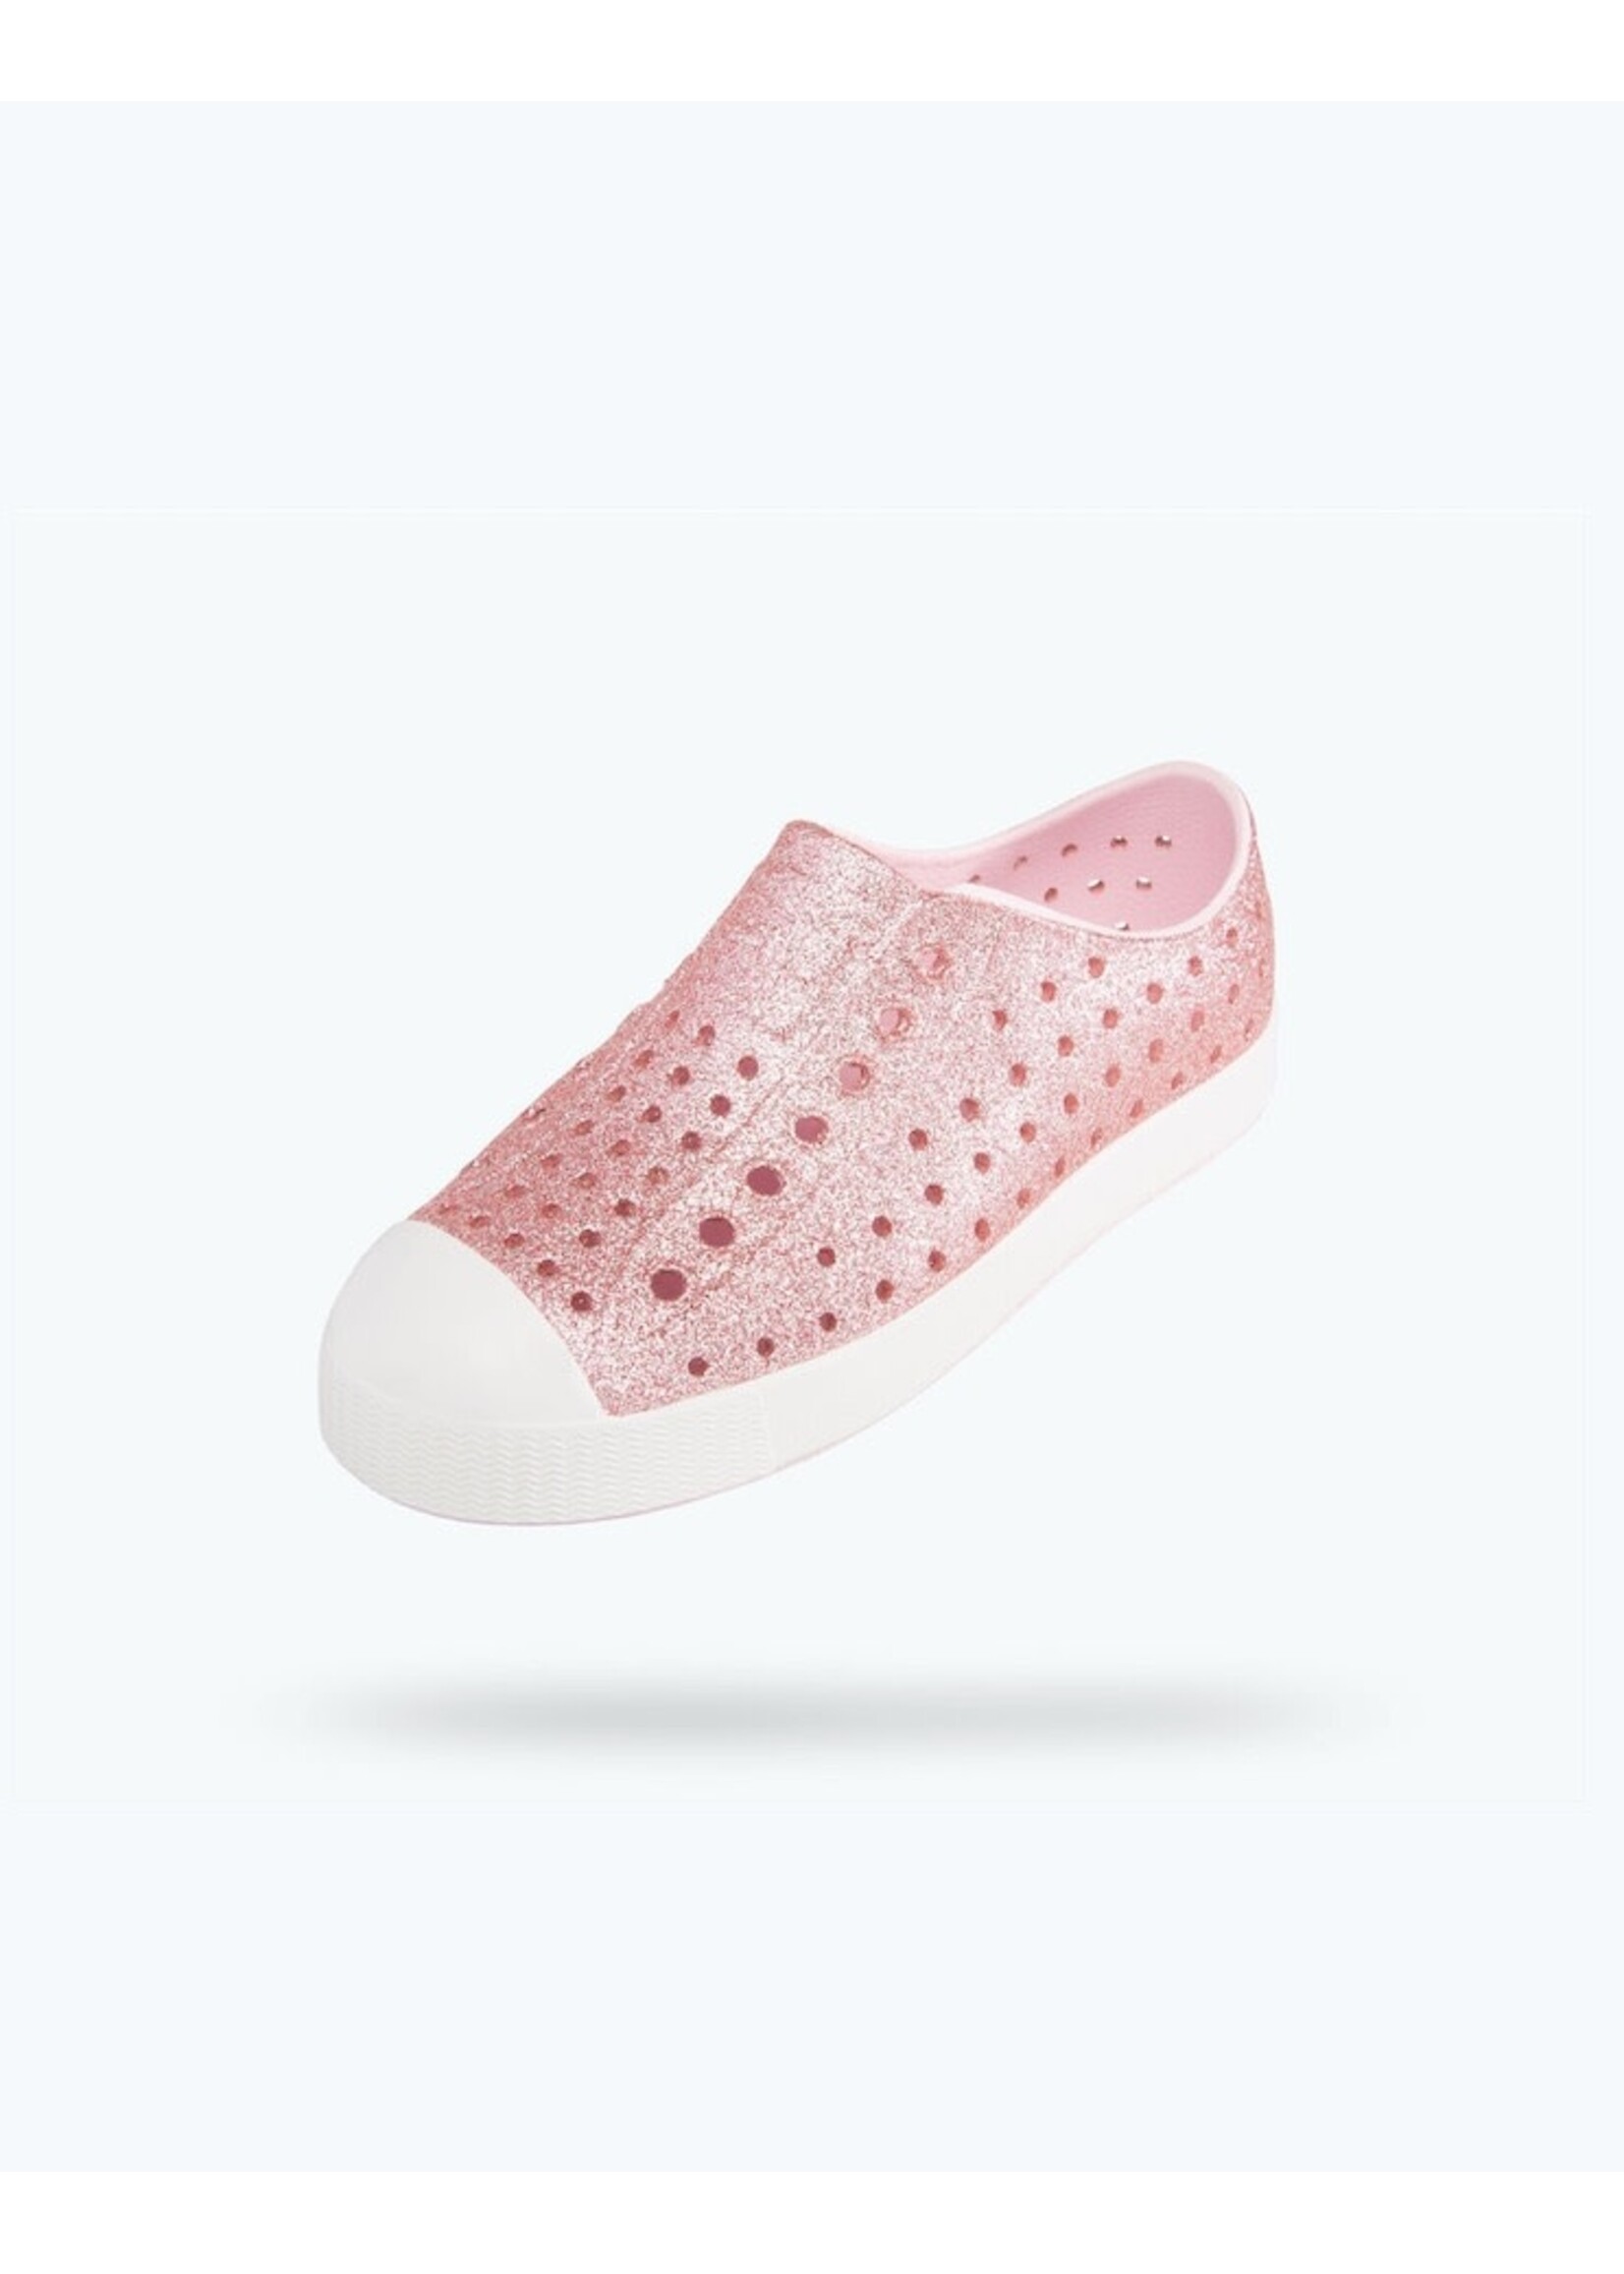 Native Shoes Native Shoes, Jefferson Bling Child || Milk Pink Bling/Shell White